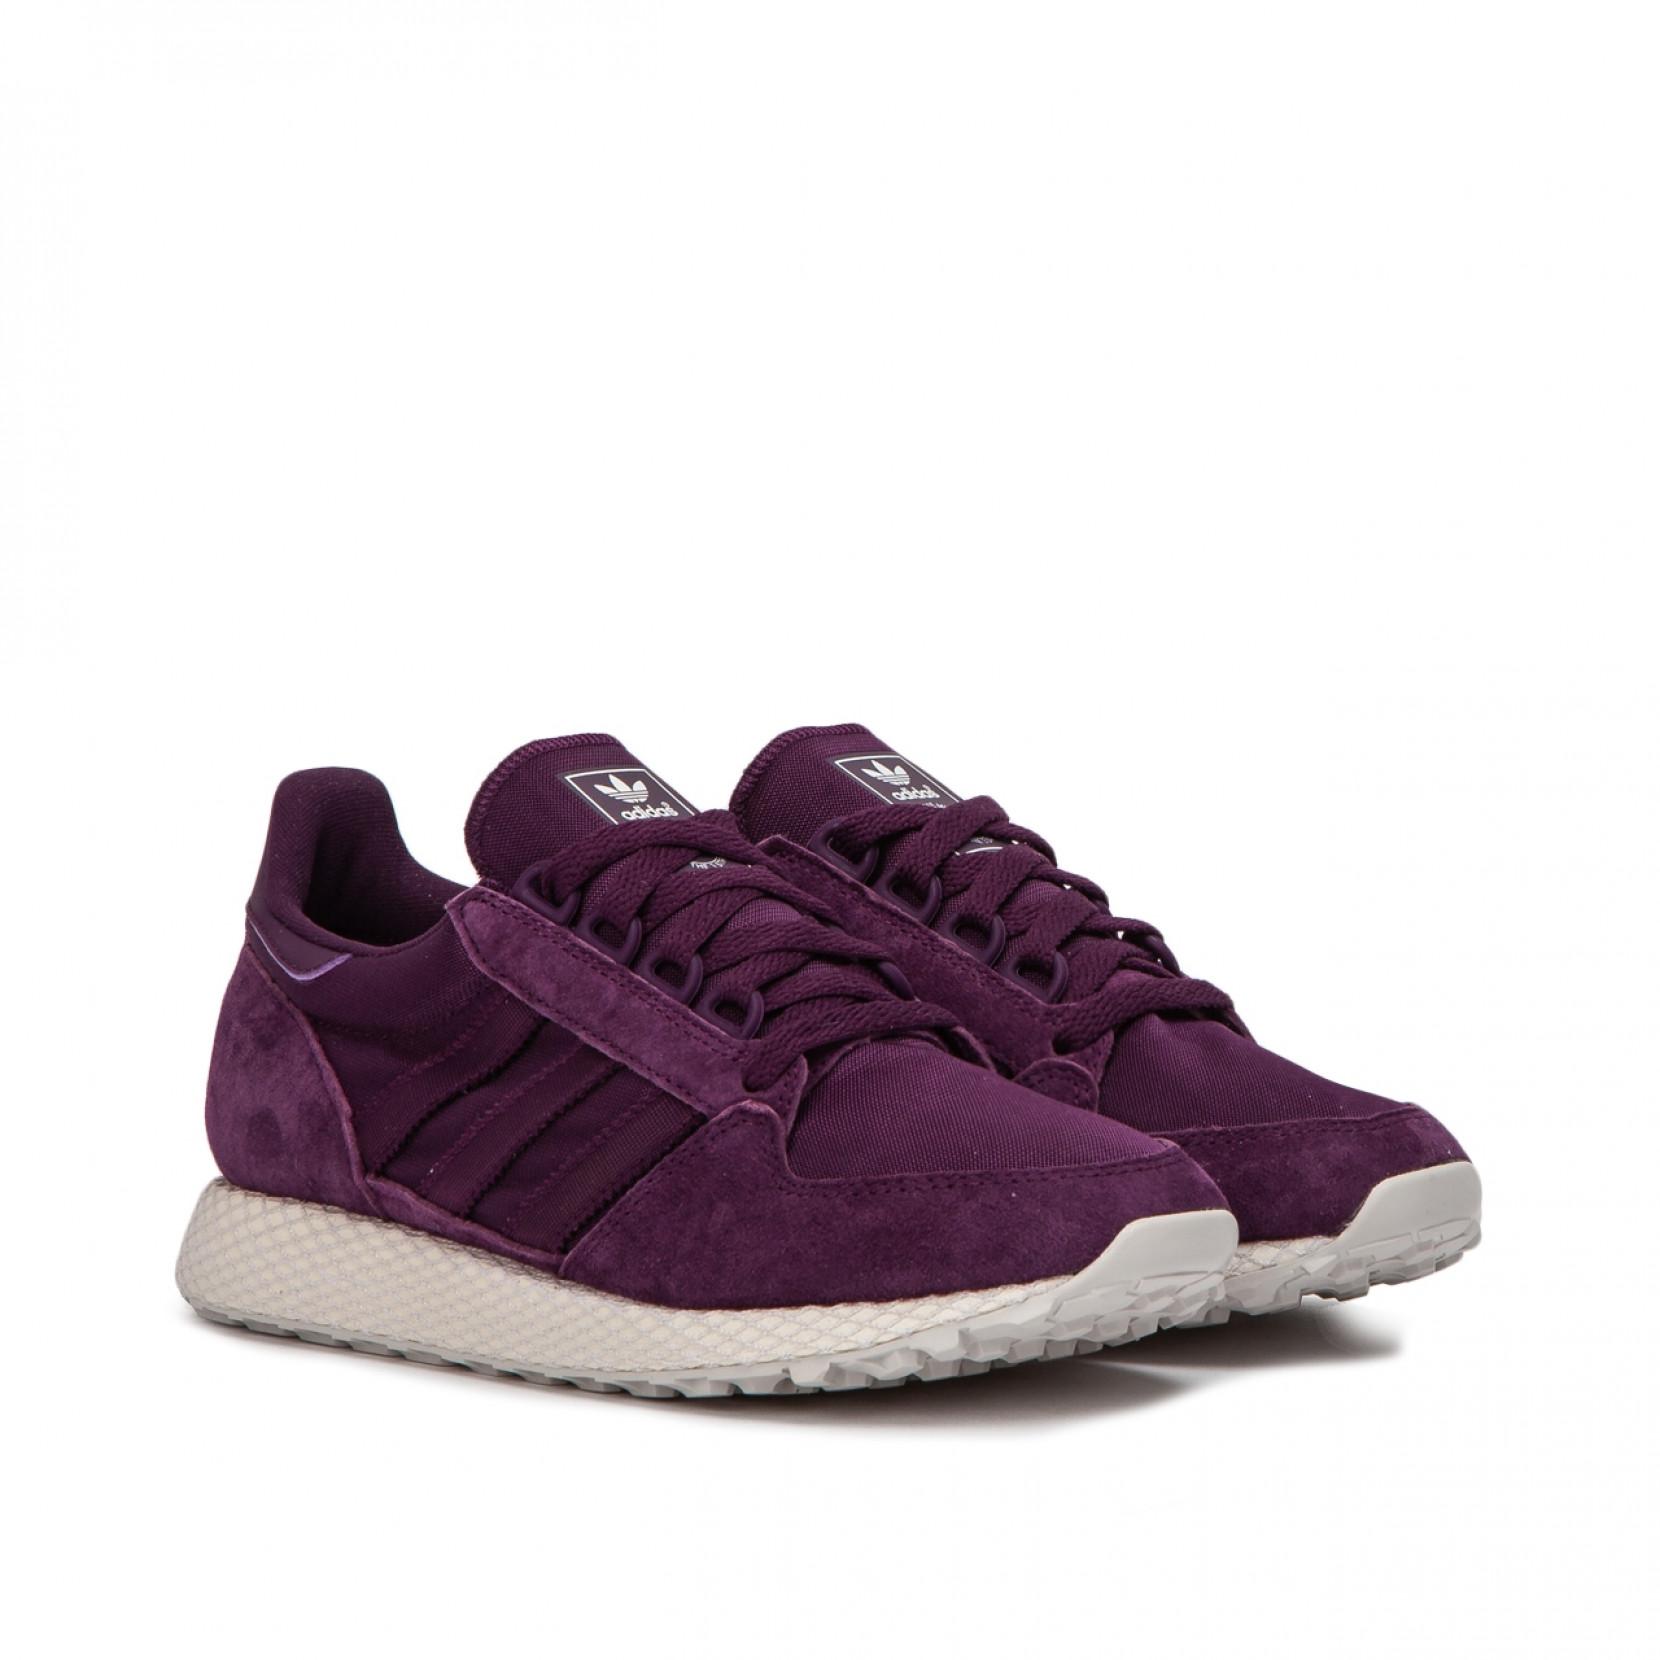 adidas Suede Forest Grove W in Purple 